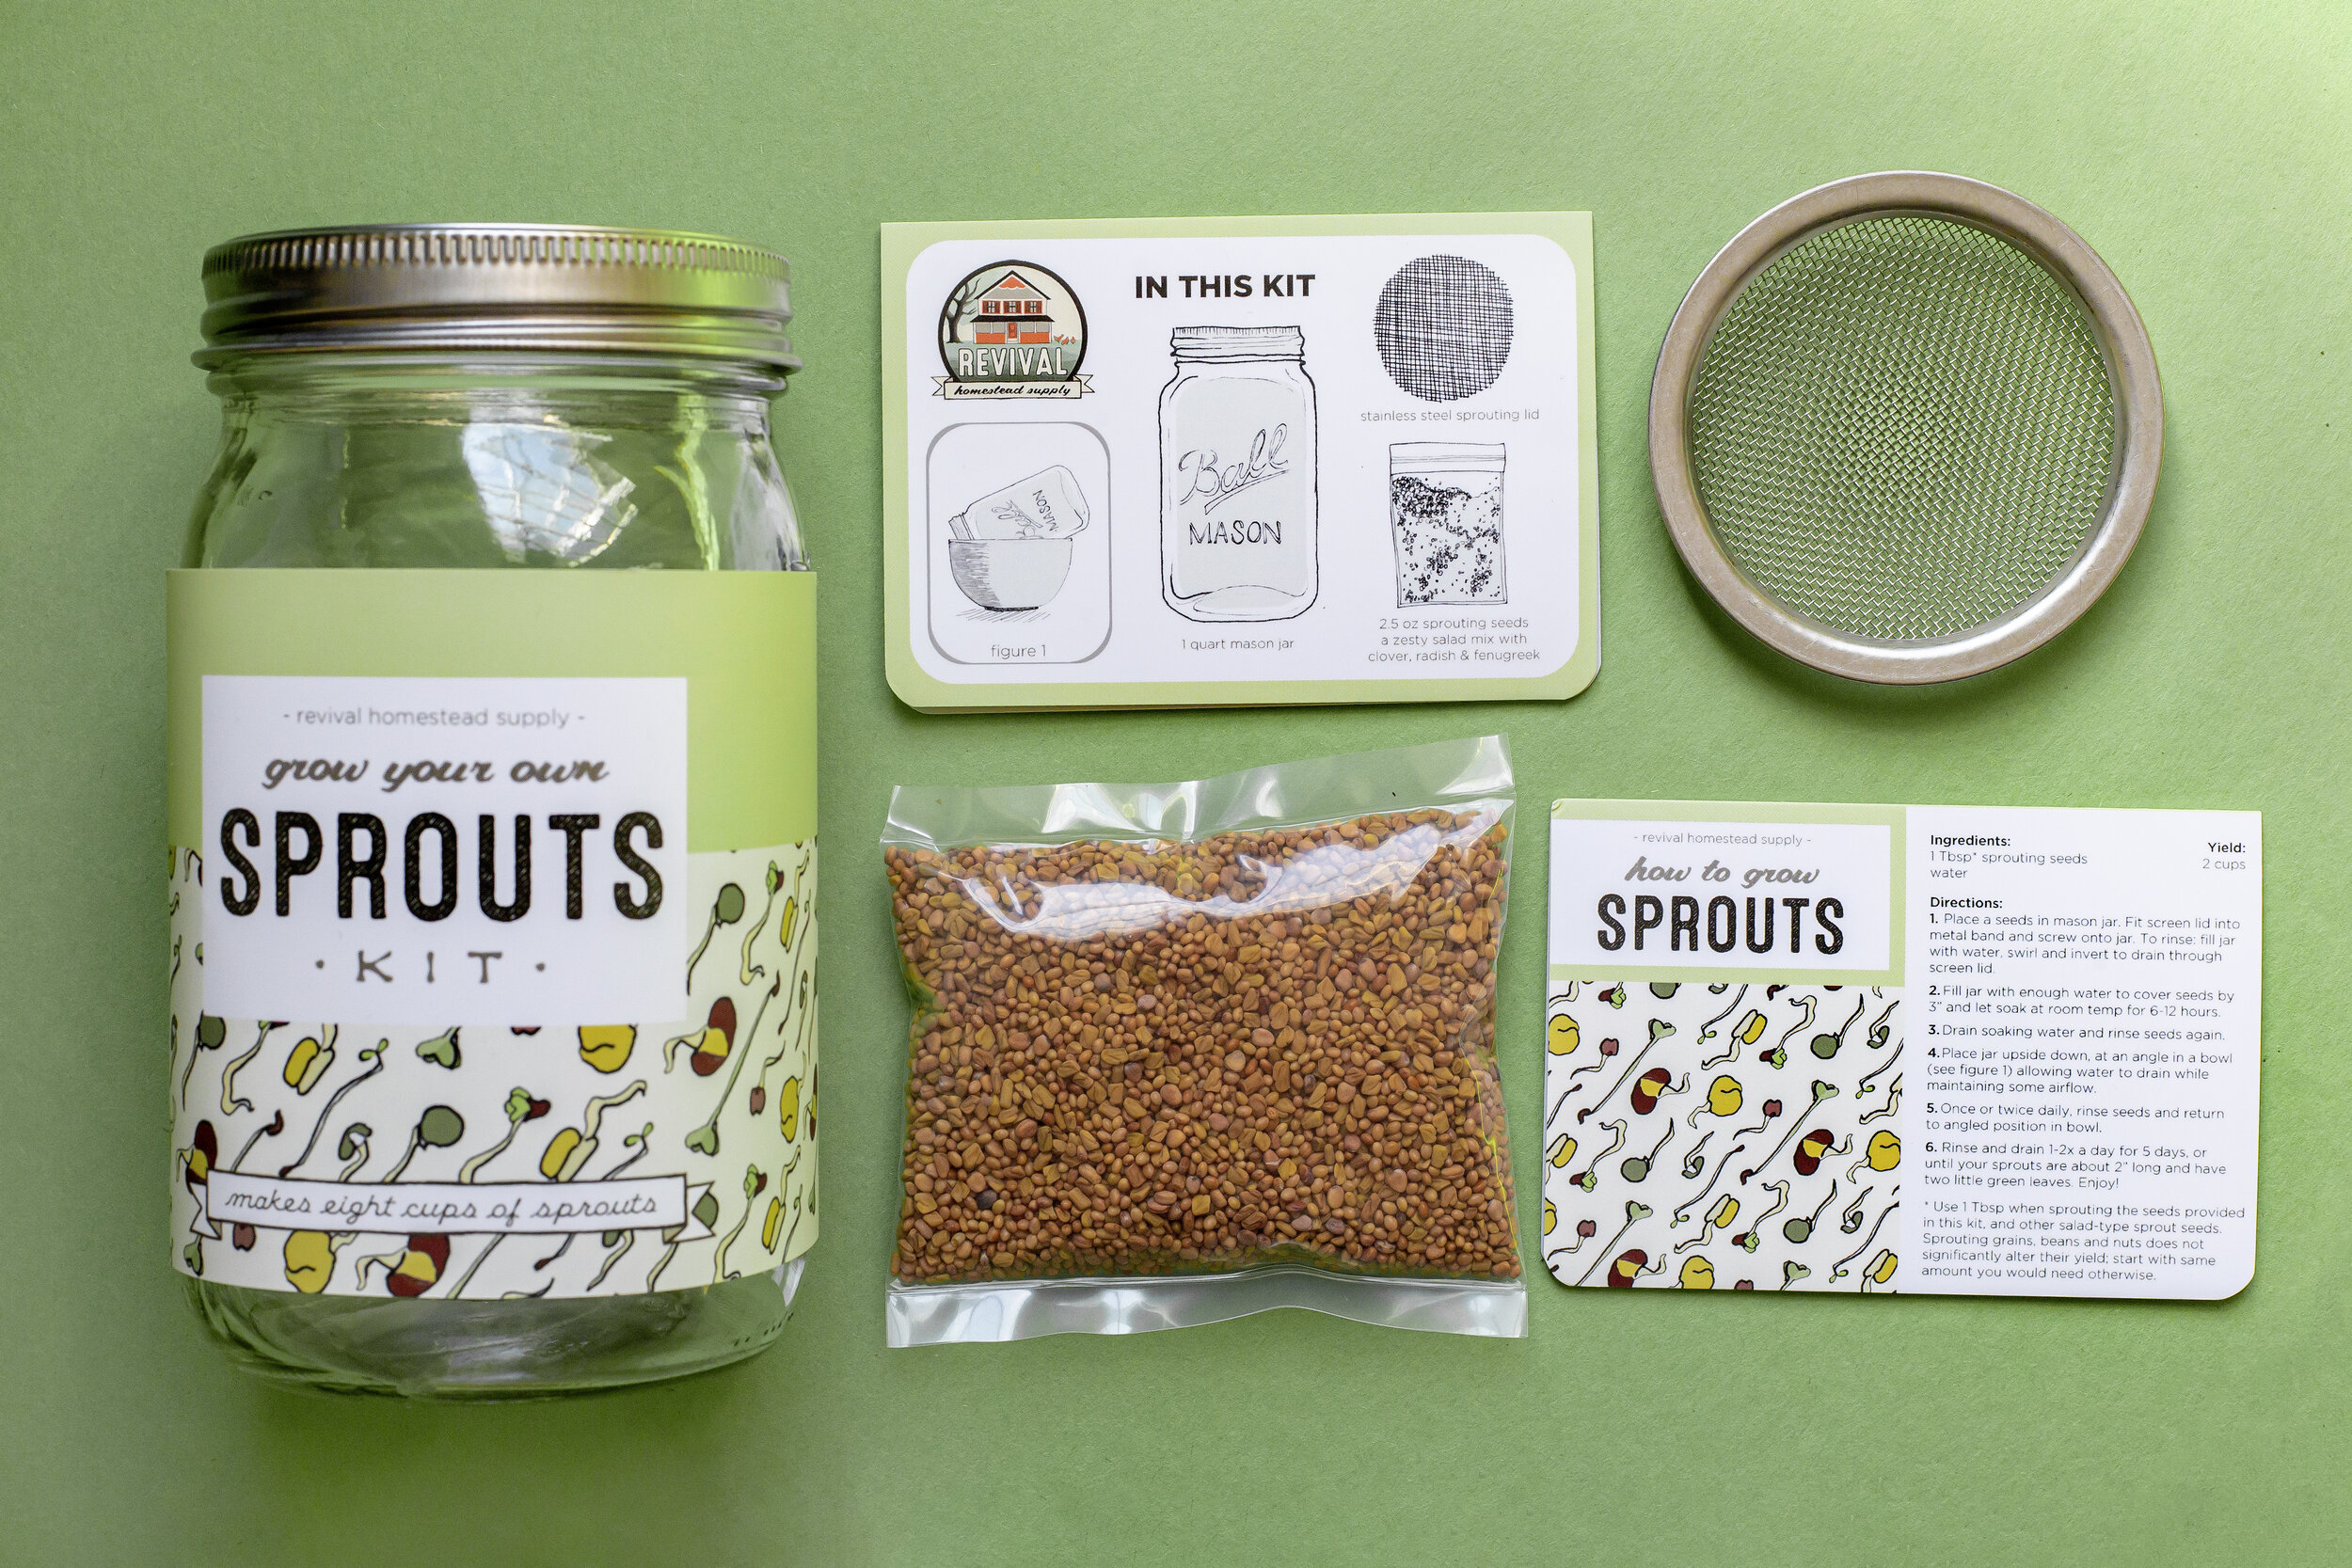 Organic Sprouting Kit from Revival Homestead Supply